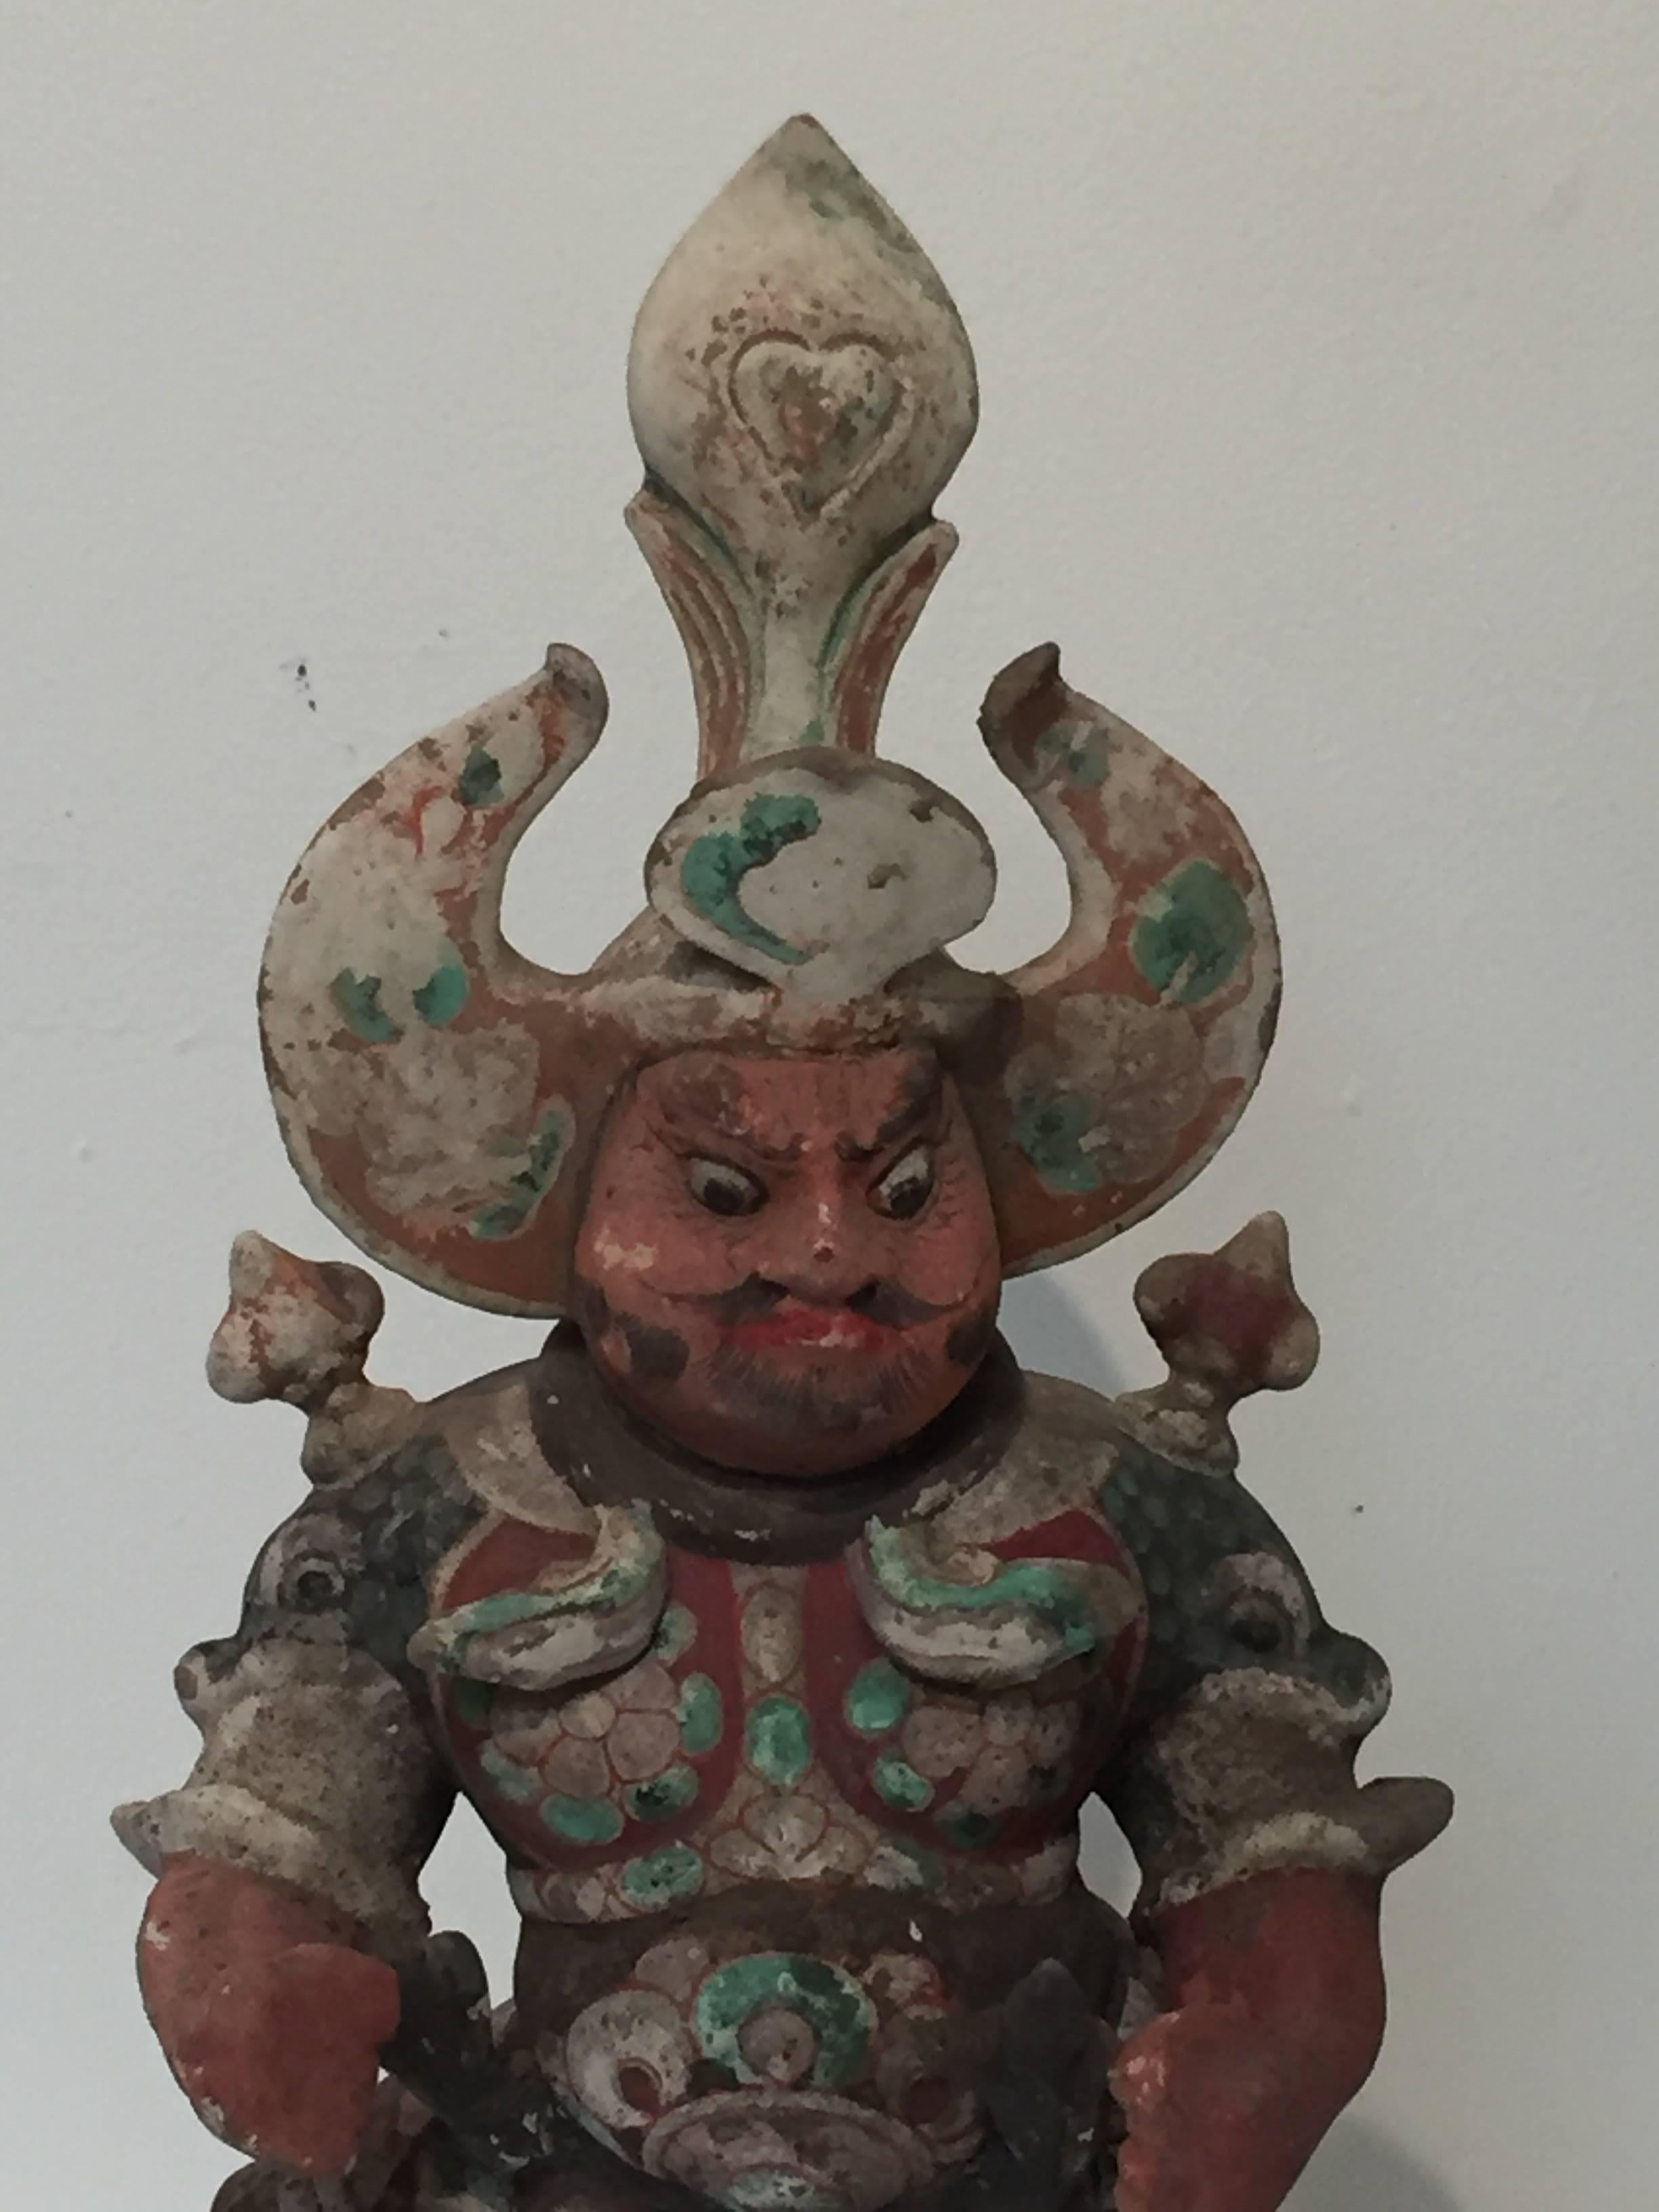 Tang dynasty (618-907 A.D.) guardian figure, also known as a Lokapala.

This magnificent Buddhist Lokapala or guardian king originally served as tomb guardian in an aristocratic Tang burial. Wearing an elaborate headdress and armor, and with a